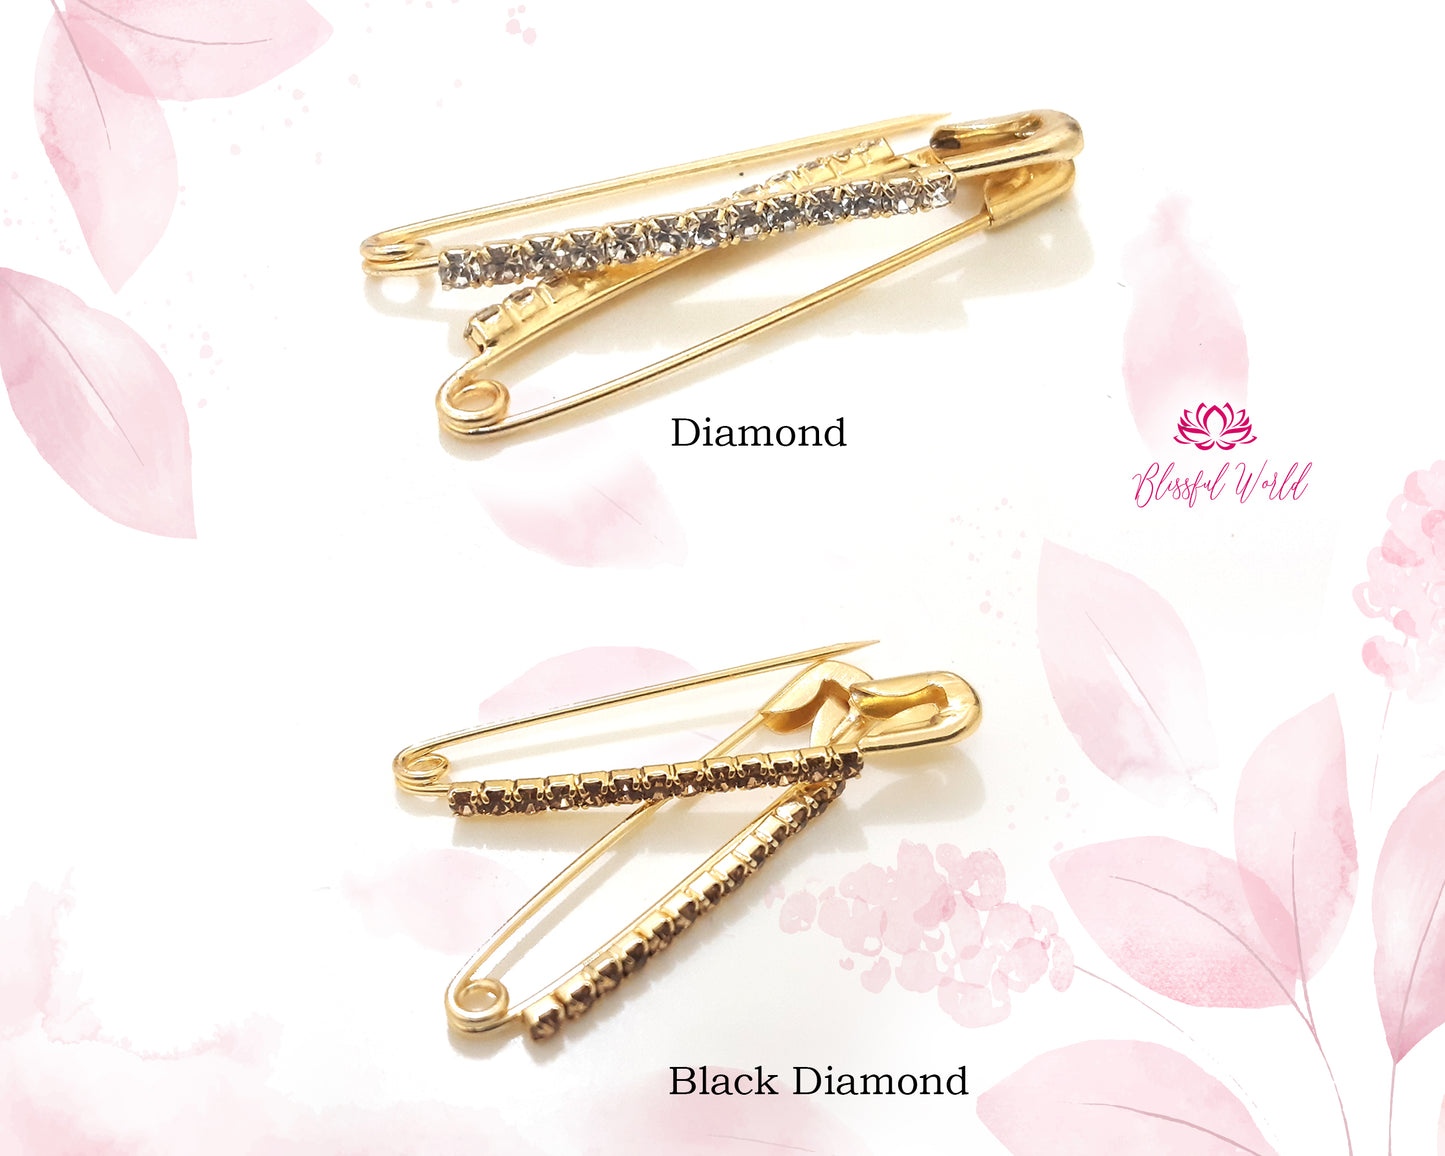 Decorative Diamond Pins For Brides Wedding Bouquet Memorial Photo Attachment Brooch Pins Safety Pins Color Full Pins Sash Pins